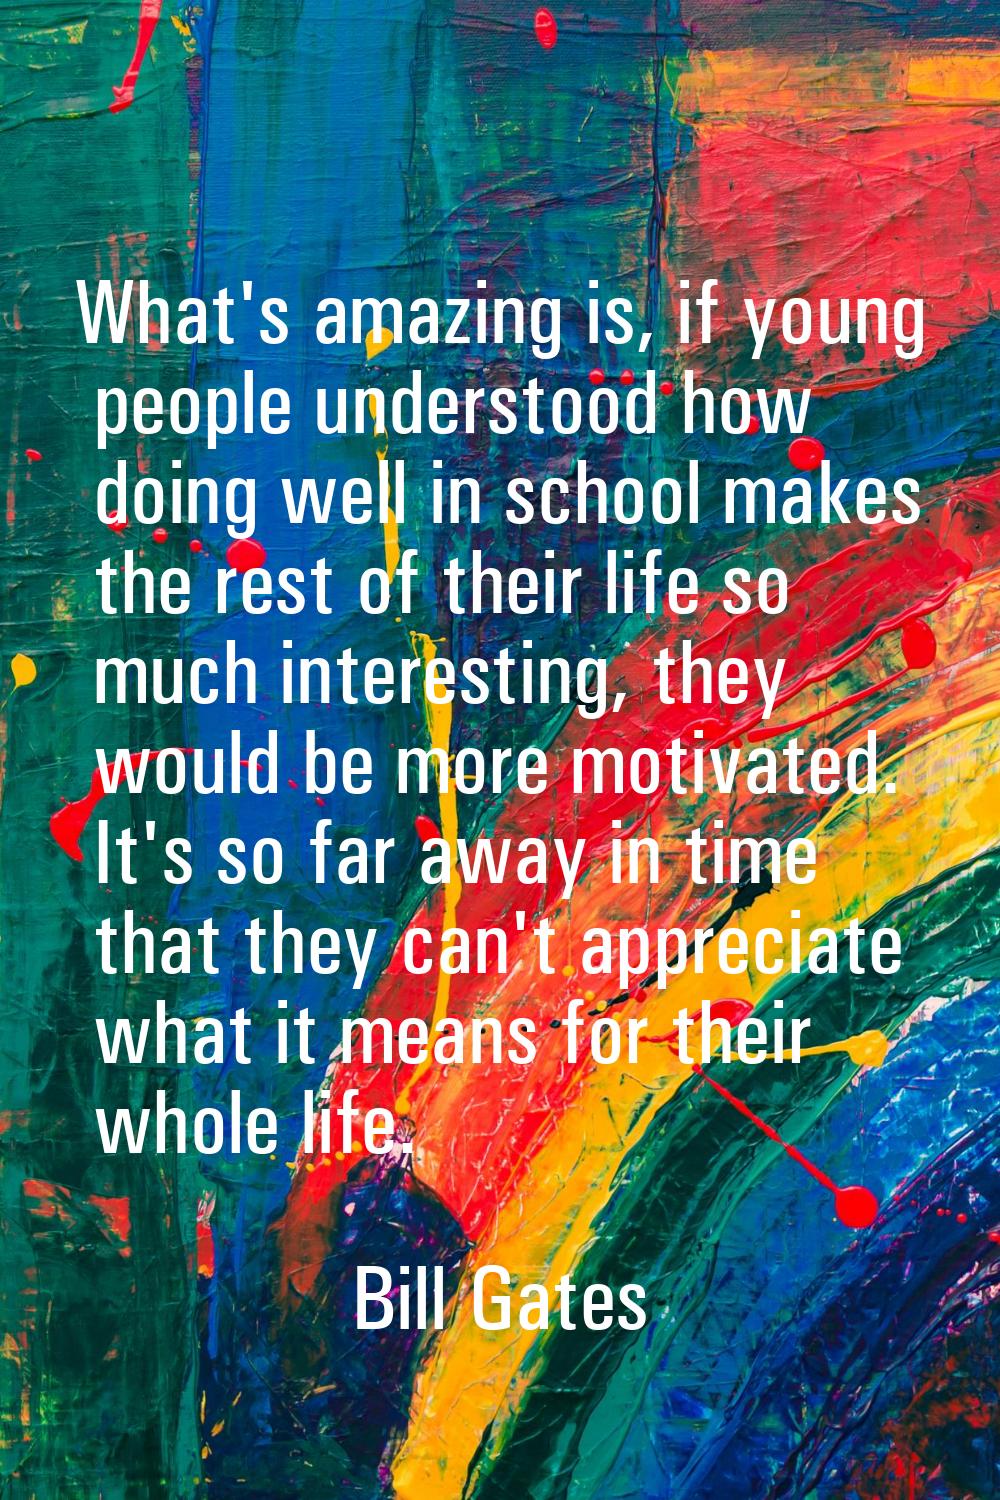 What's amazing is, if young people understood how doing well in school makes the rest of their life